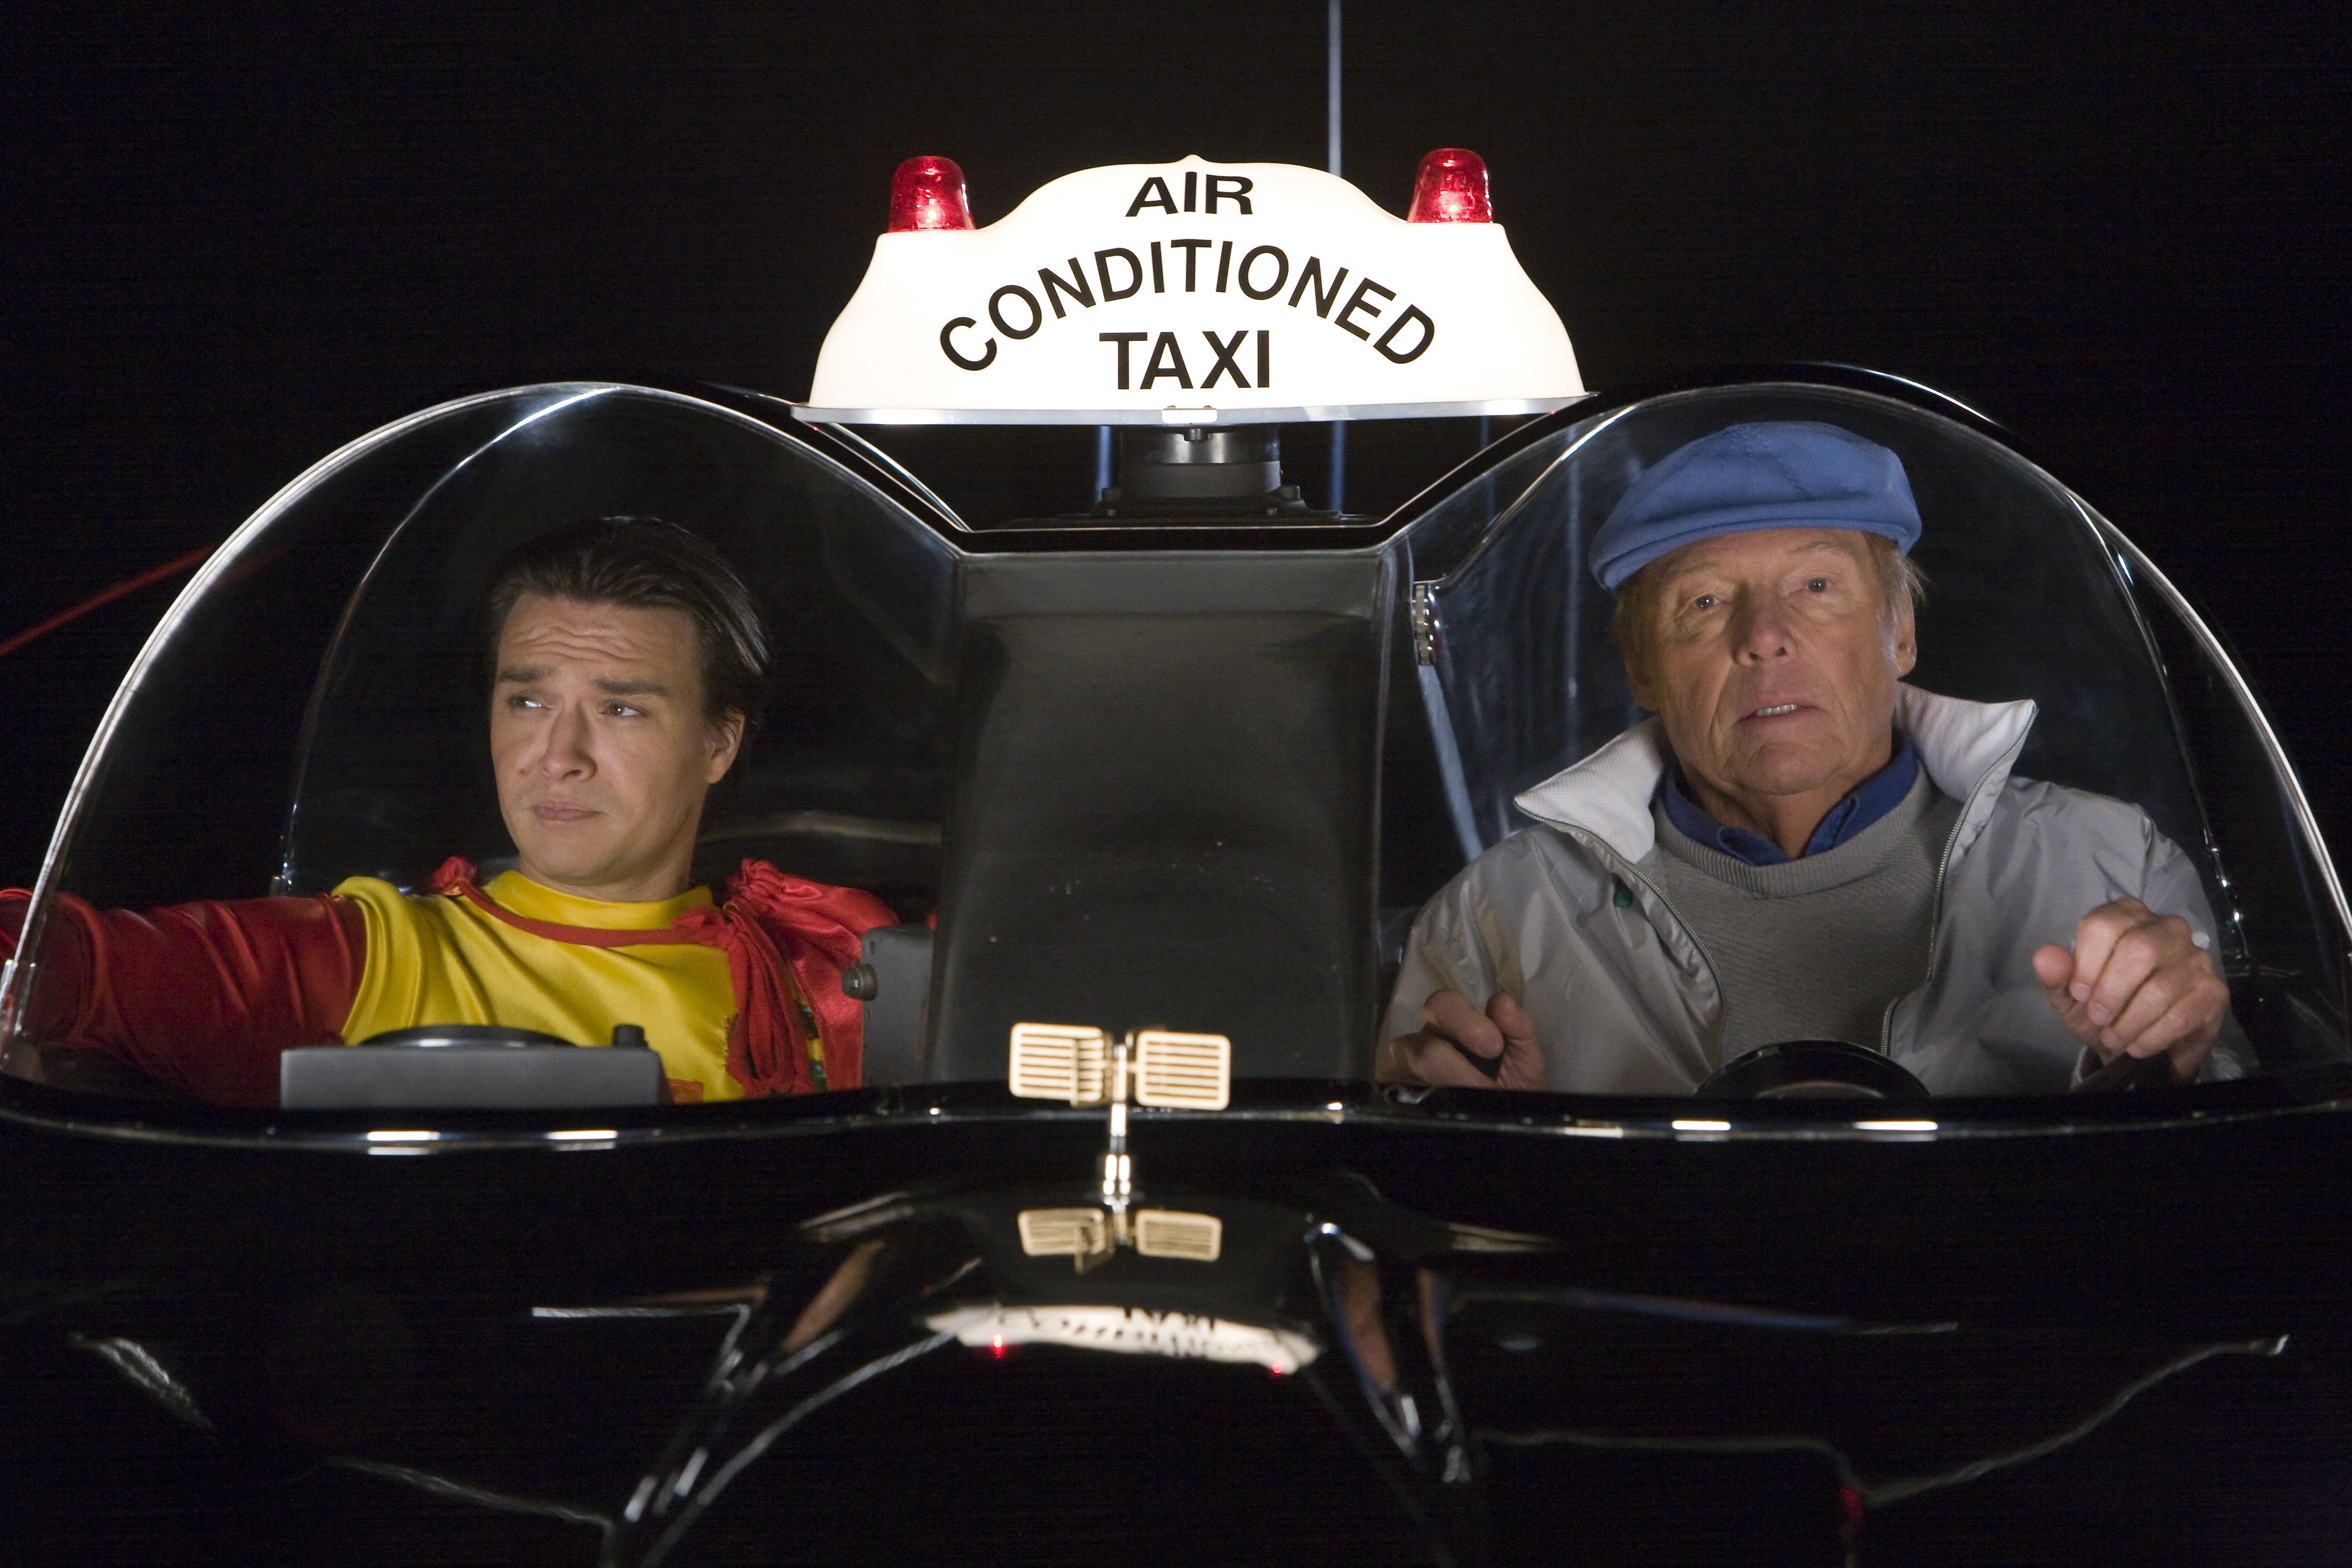 Adam West and Justin Whalin in Super Capers: The Origins of Ed and the Missing Bullion (2009)